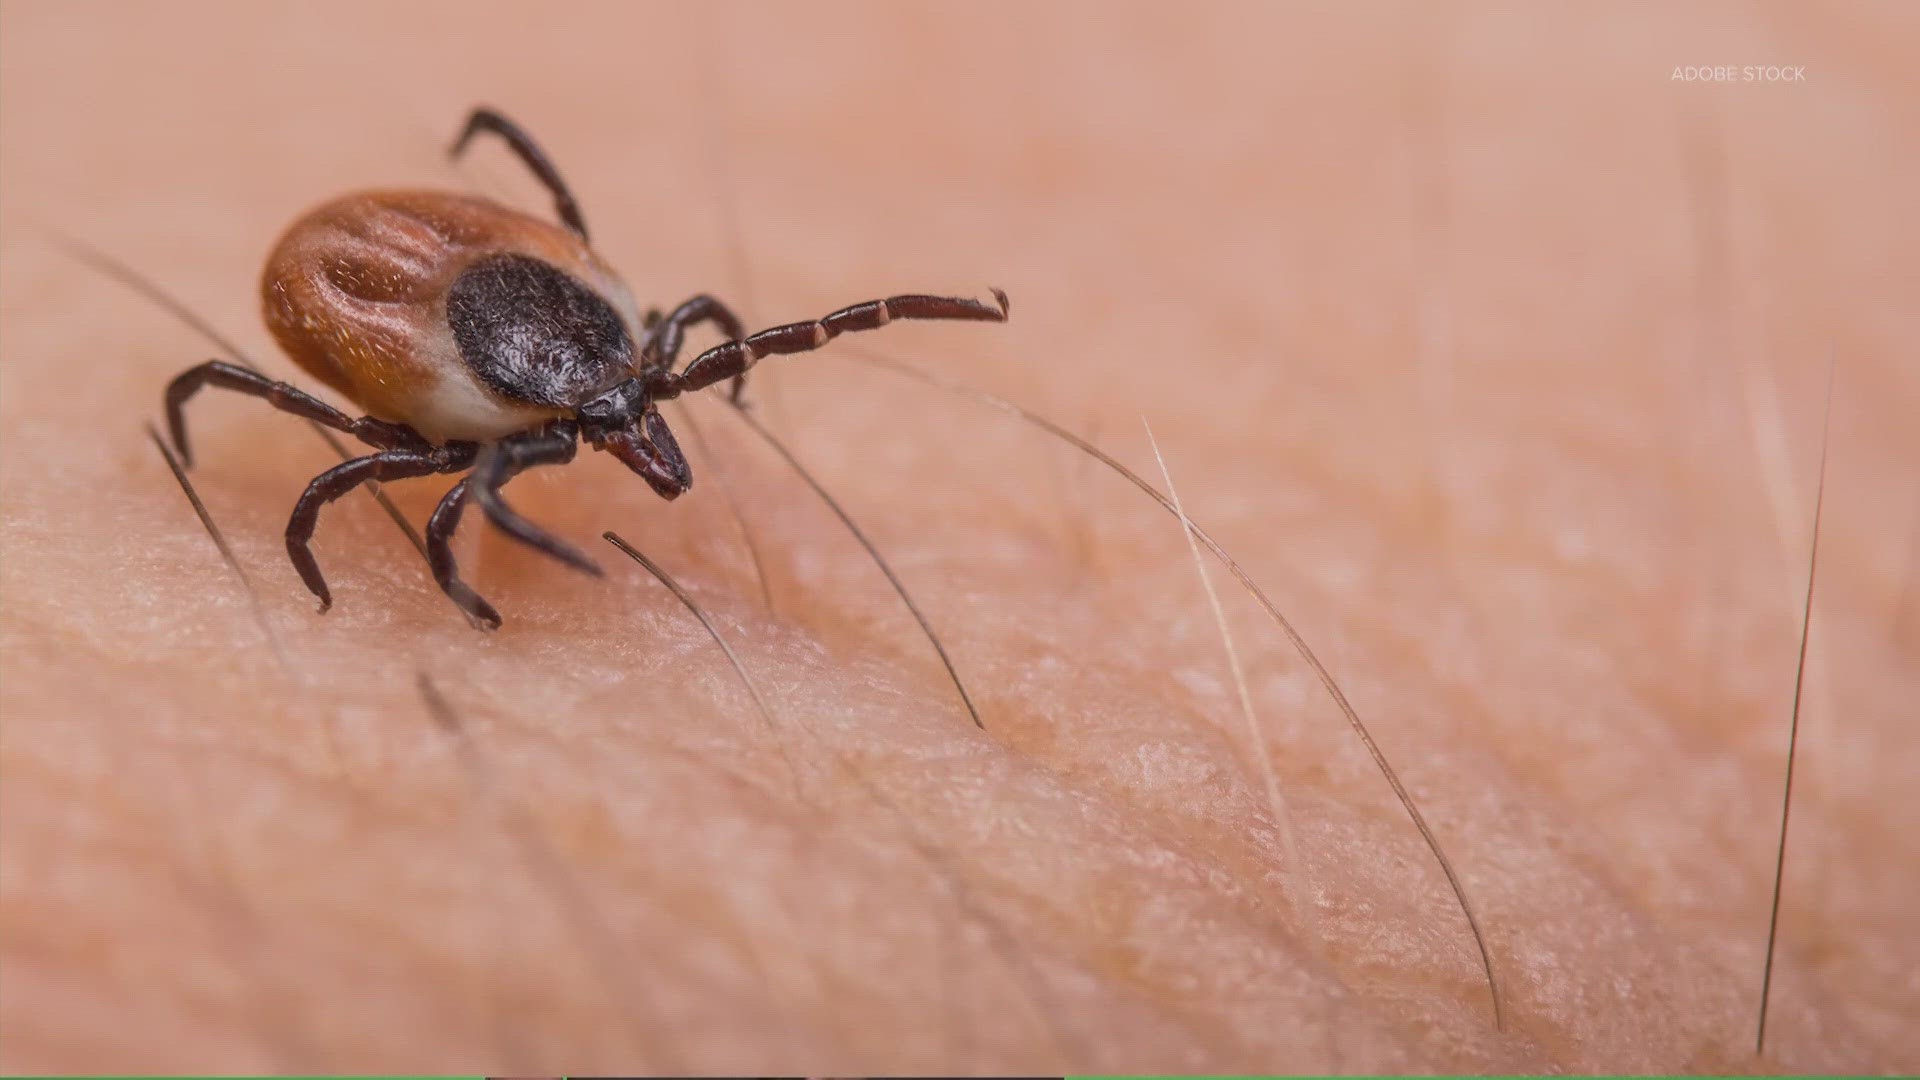 With the weather warming more every year, experts say tick season can happen earlier and earlier.